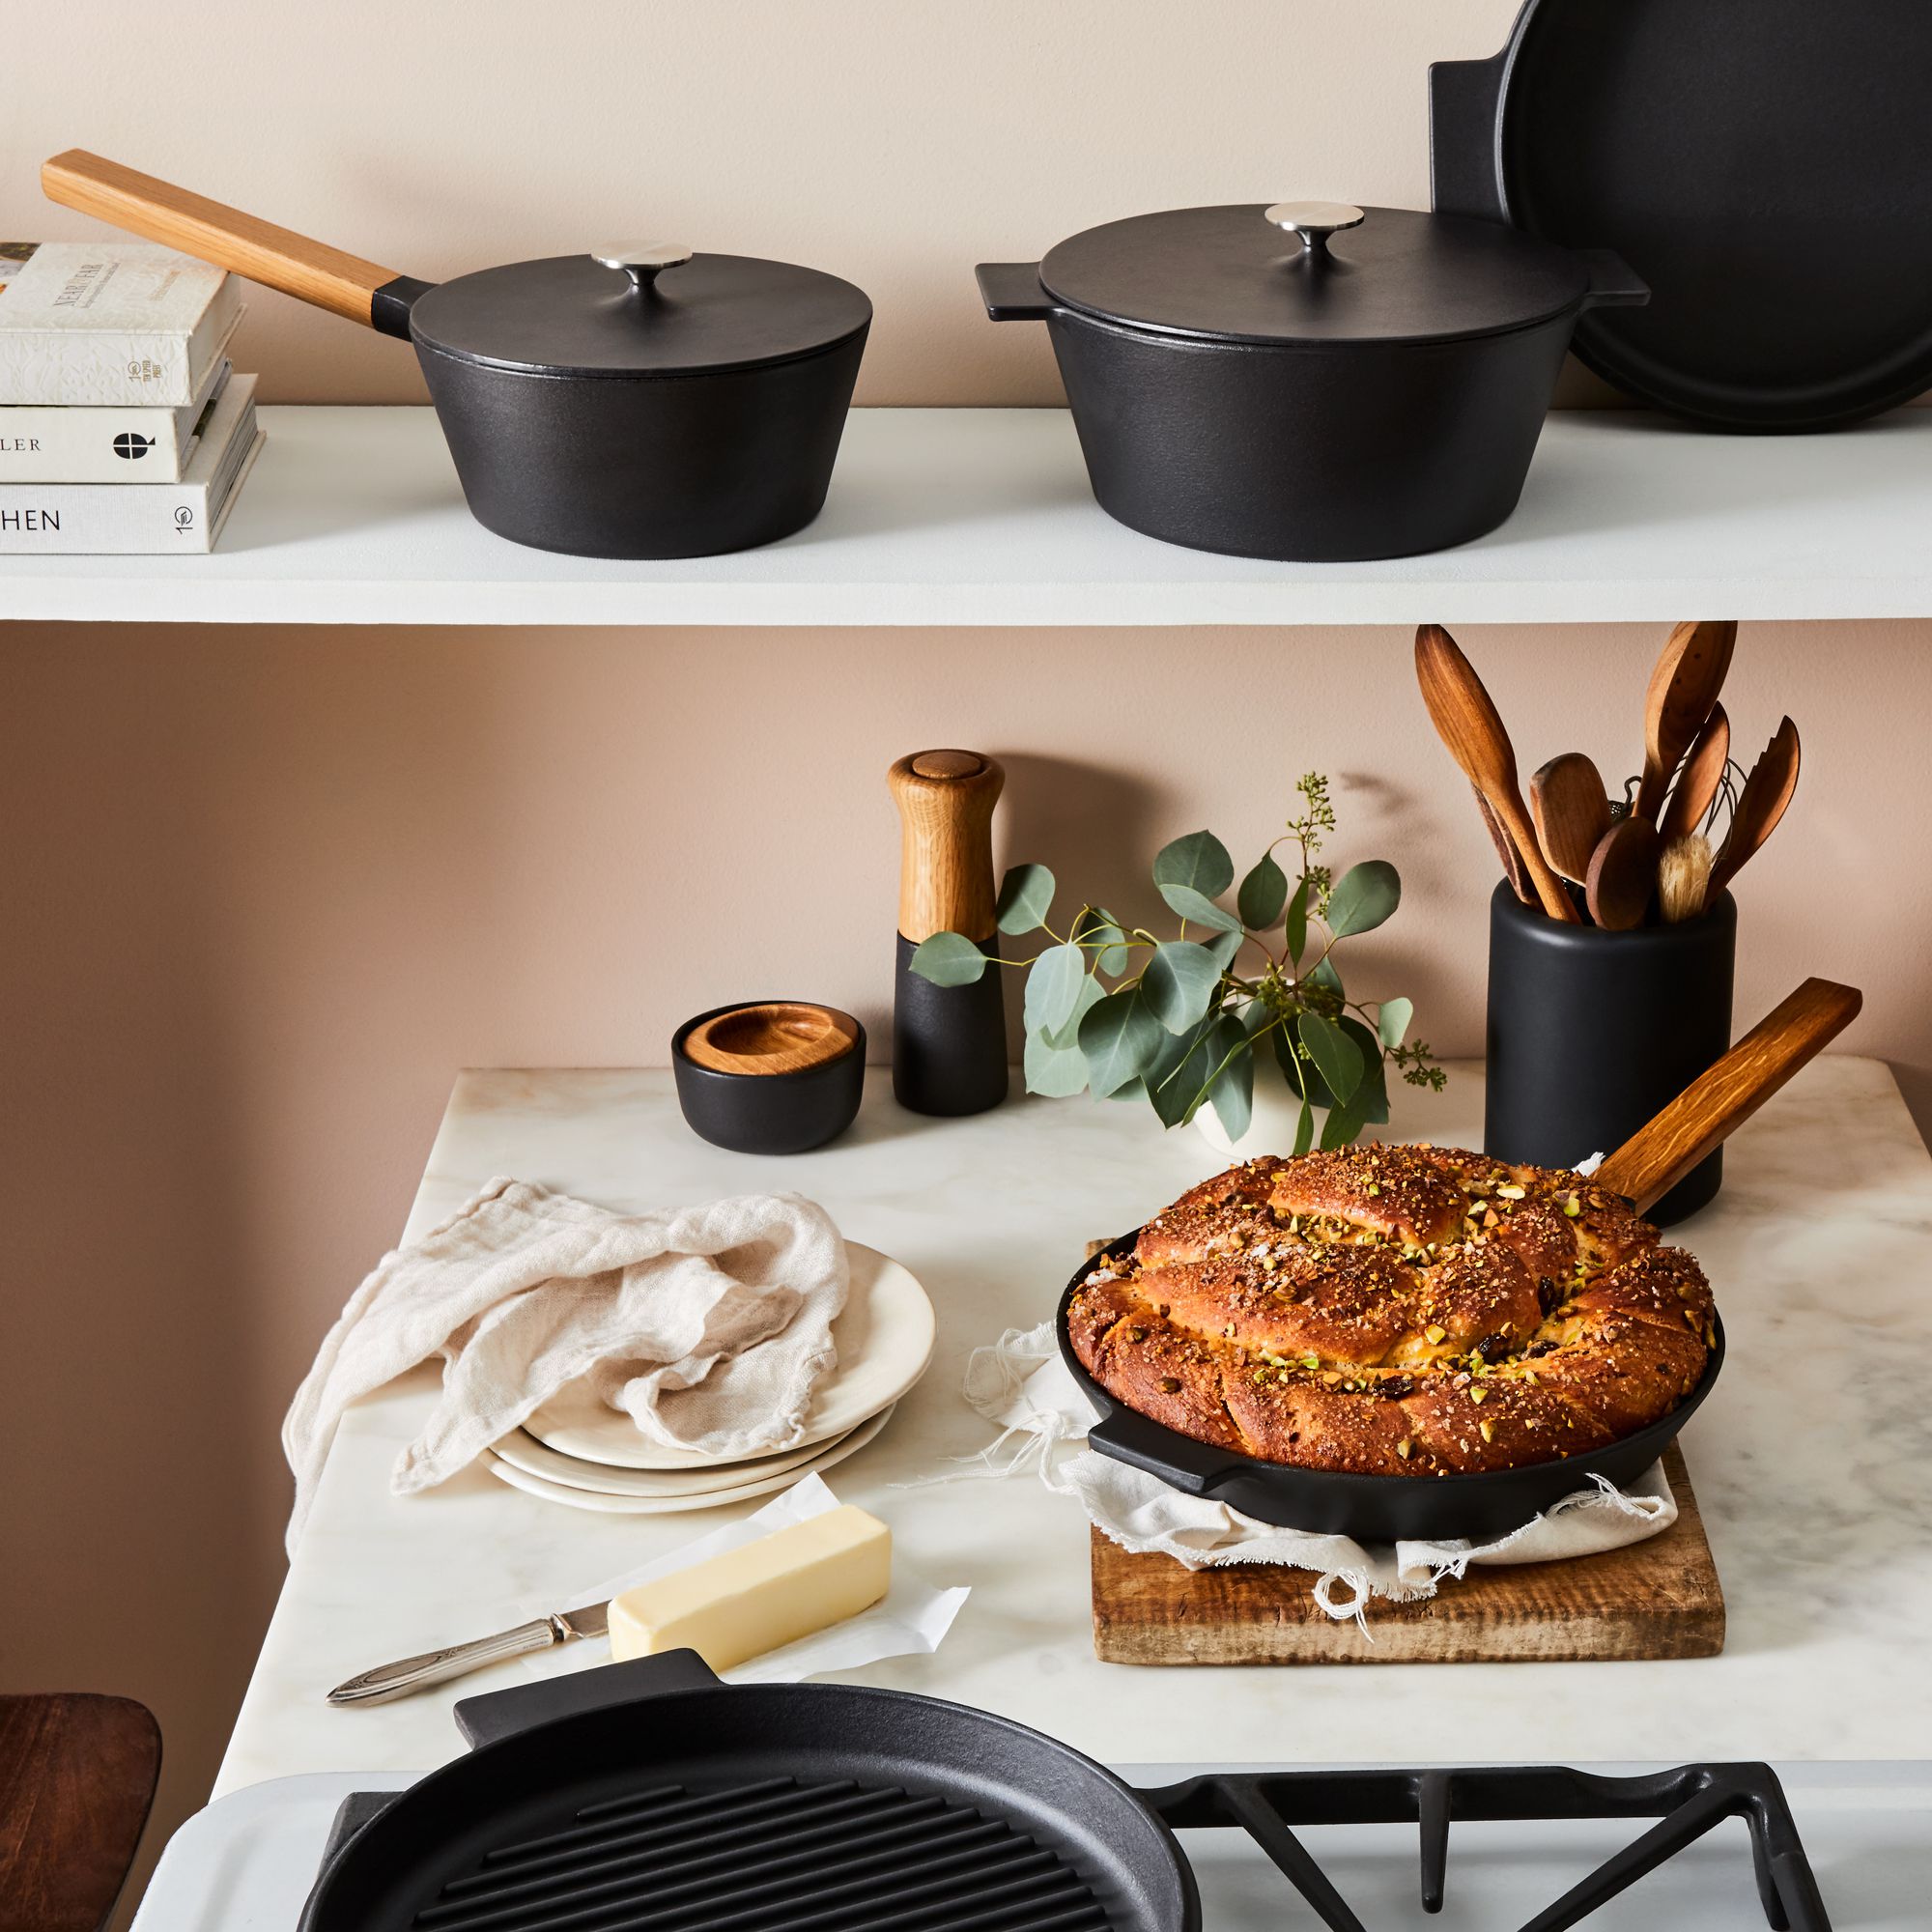 Morsø Danish Cast Iron Cookware Collection, 6 Options, Enameled Cast Iron  on Food52